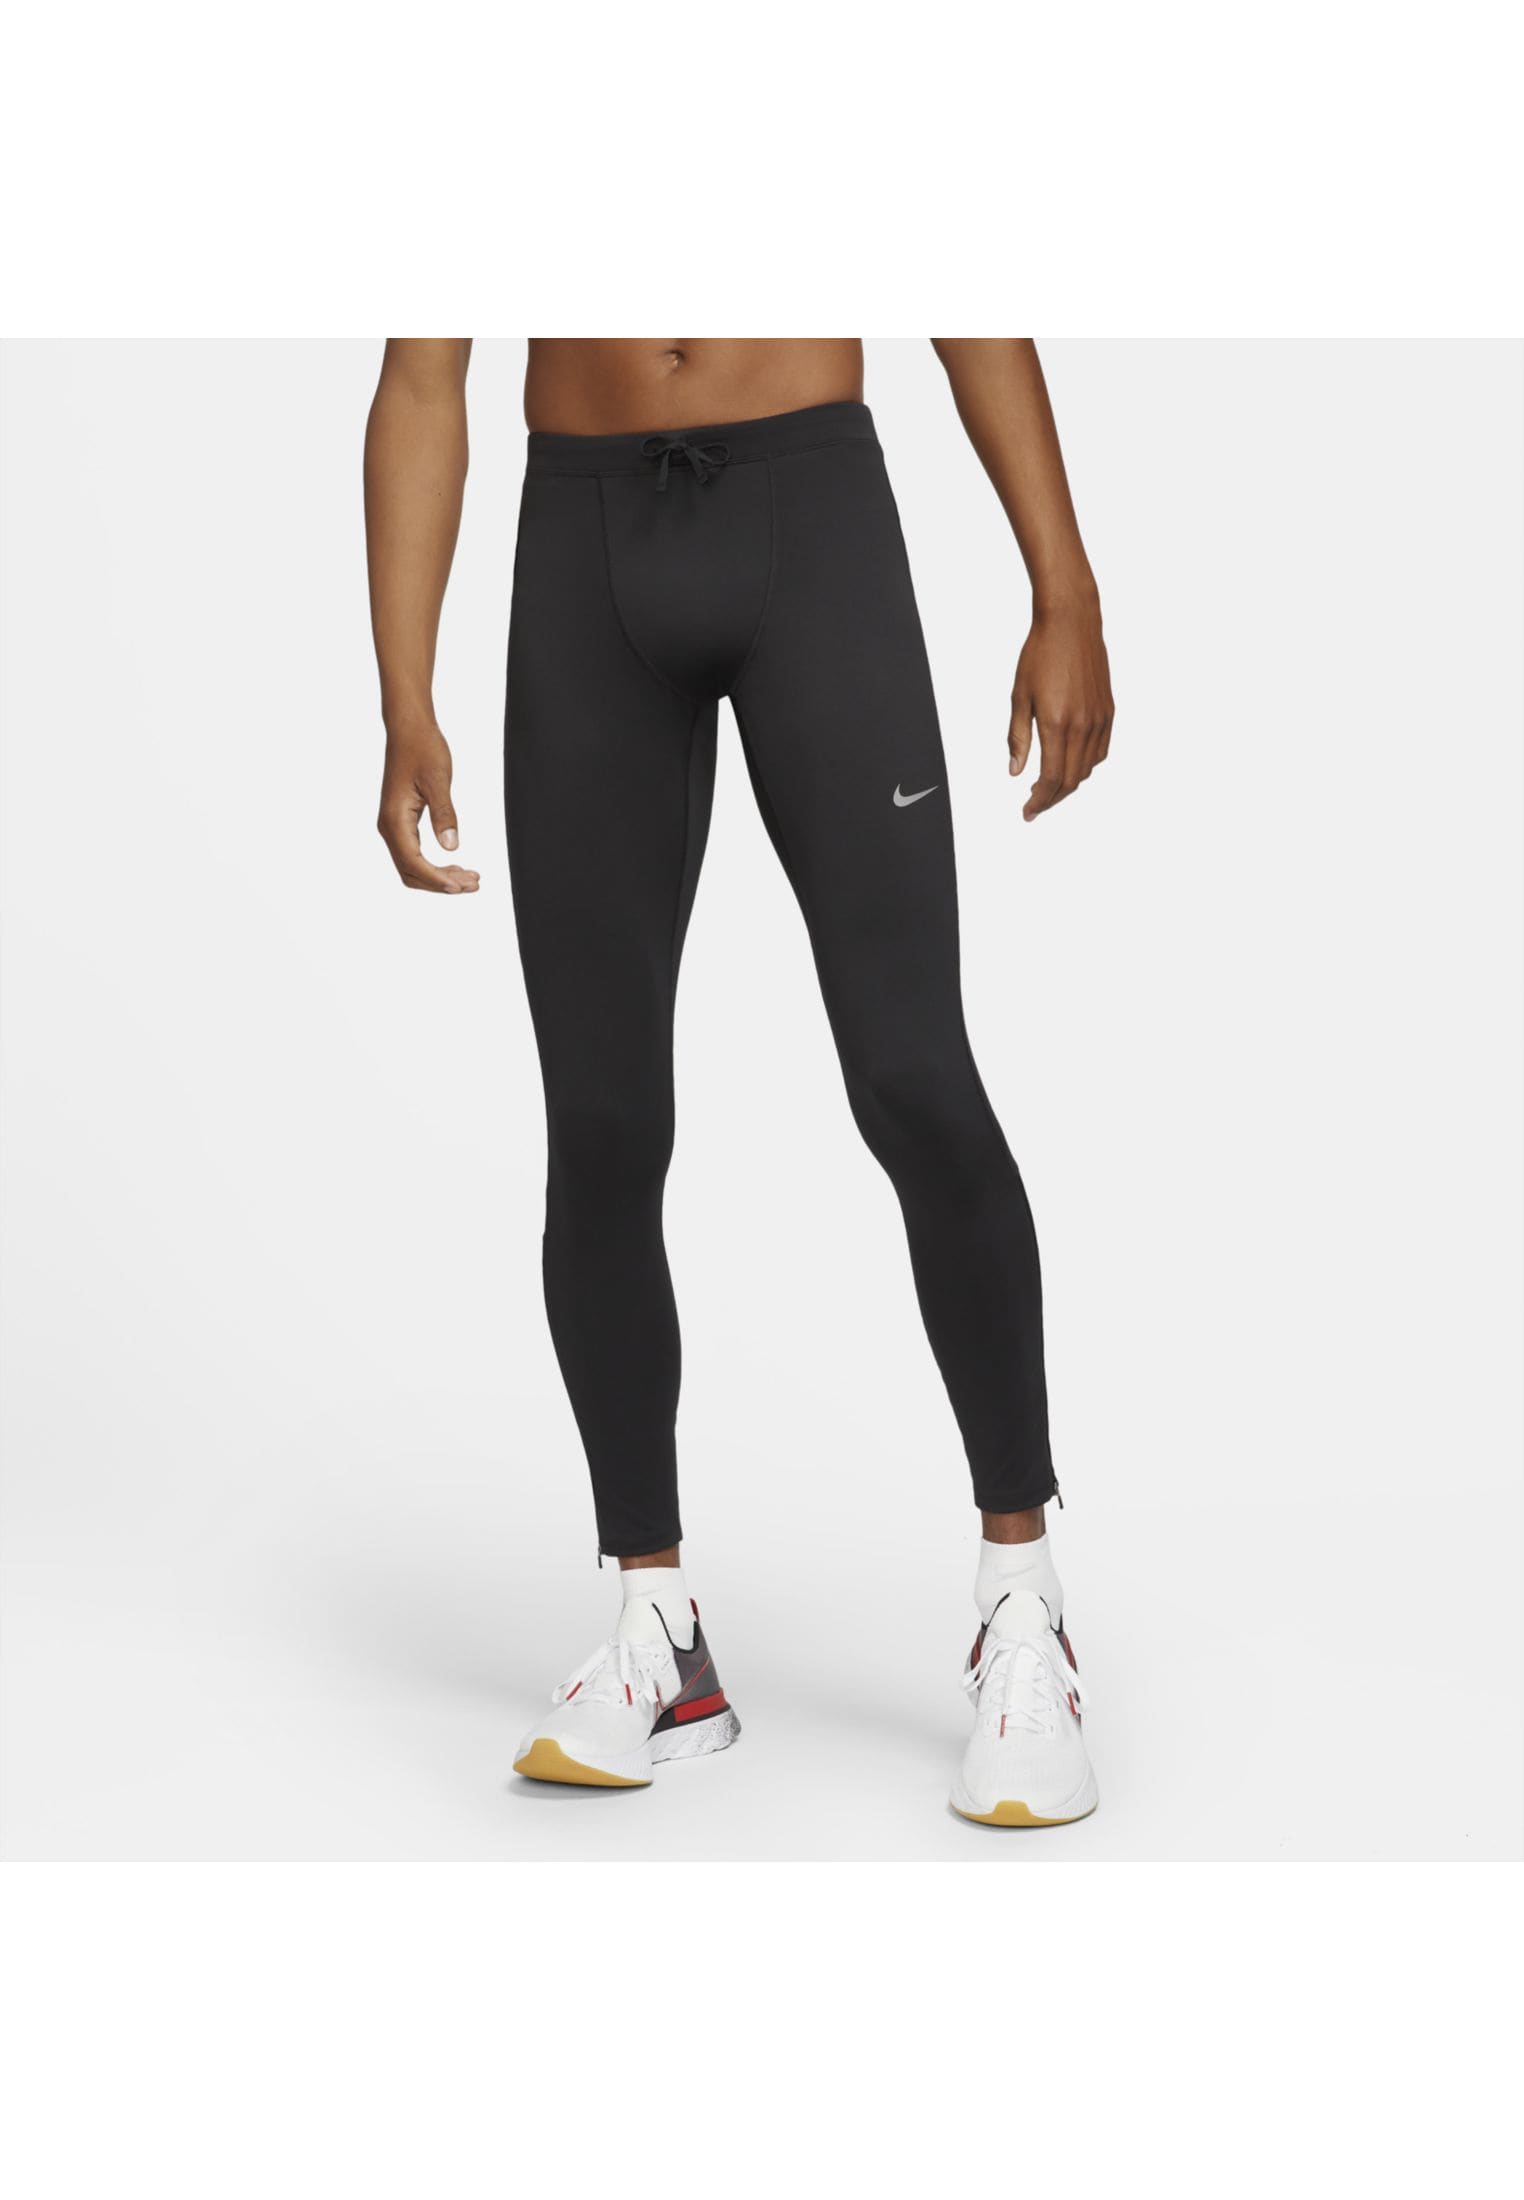 Nike Running tights REPELL CHALLENGER in black